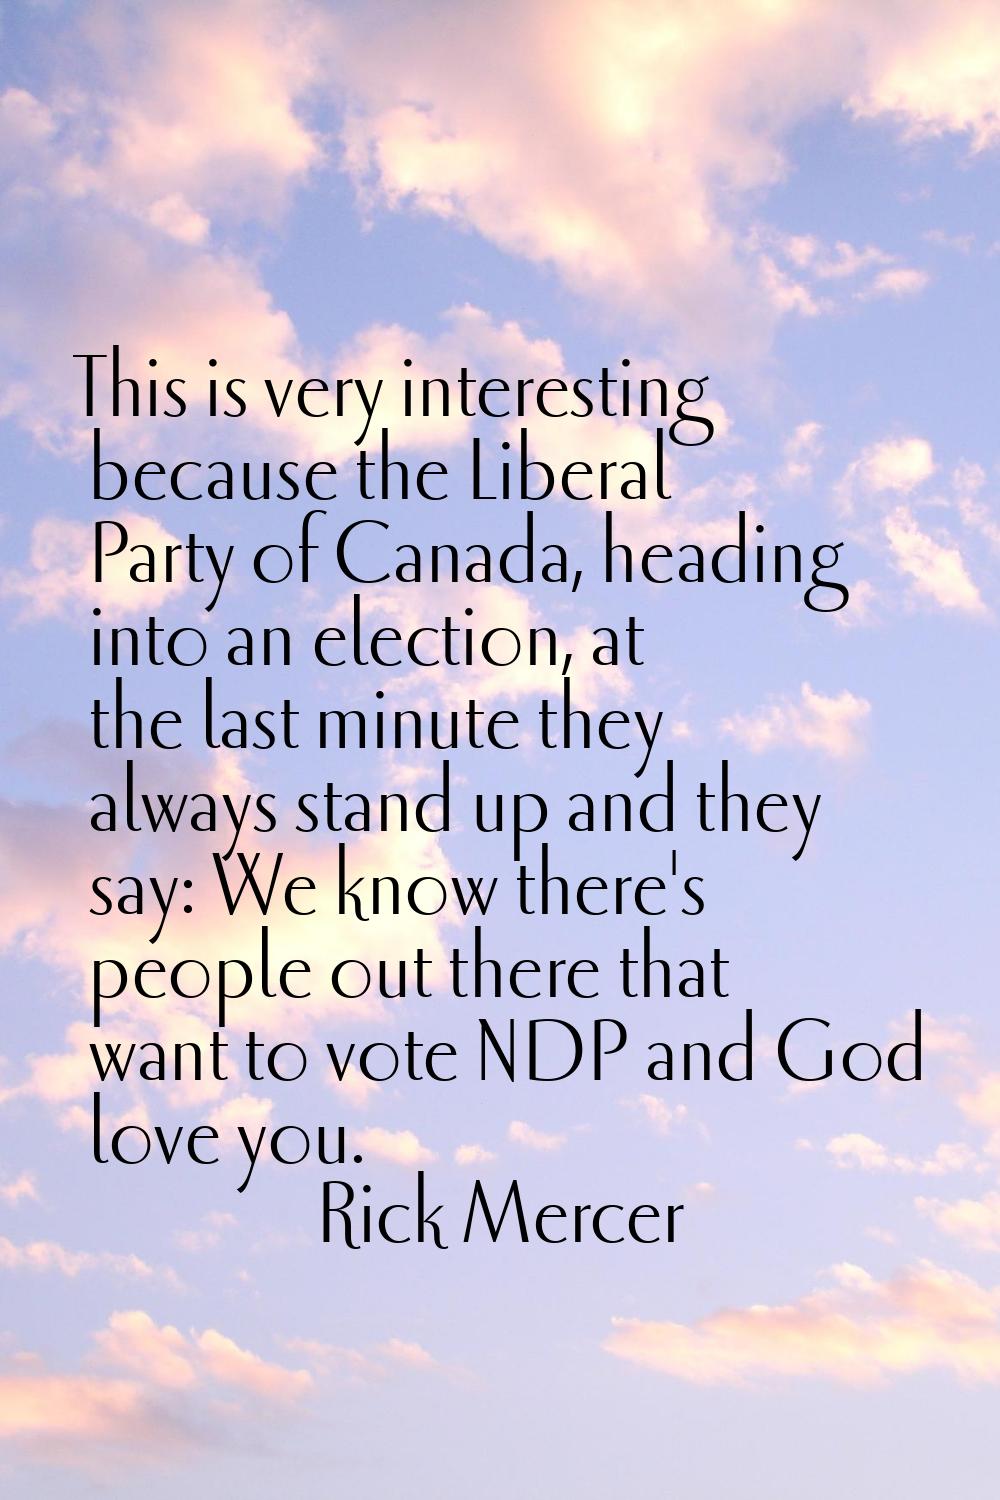 This is very interesting because the Liberal Party of Canada, heading into an election, at the last